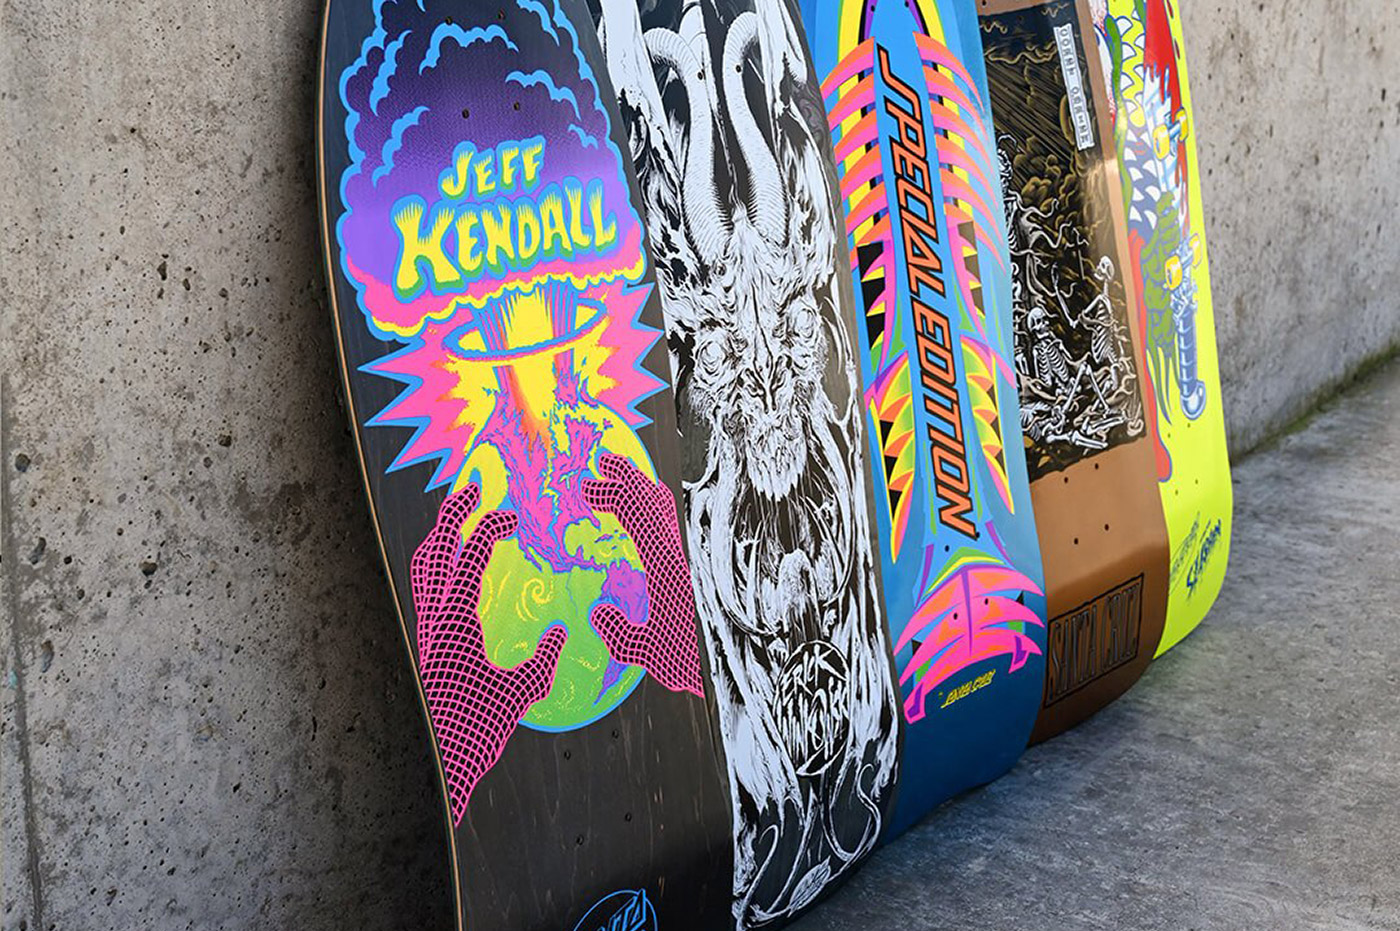 A row of brightly-decorated skateboards.